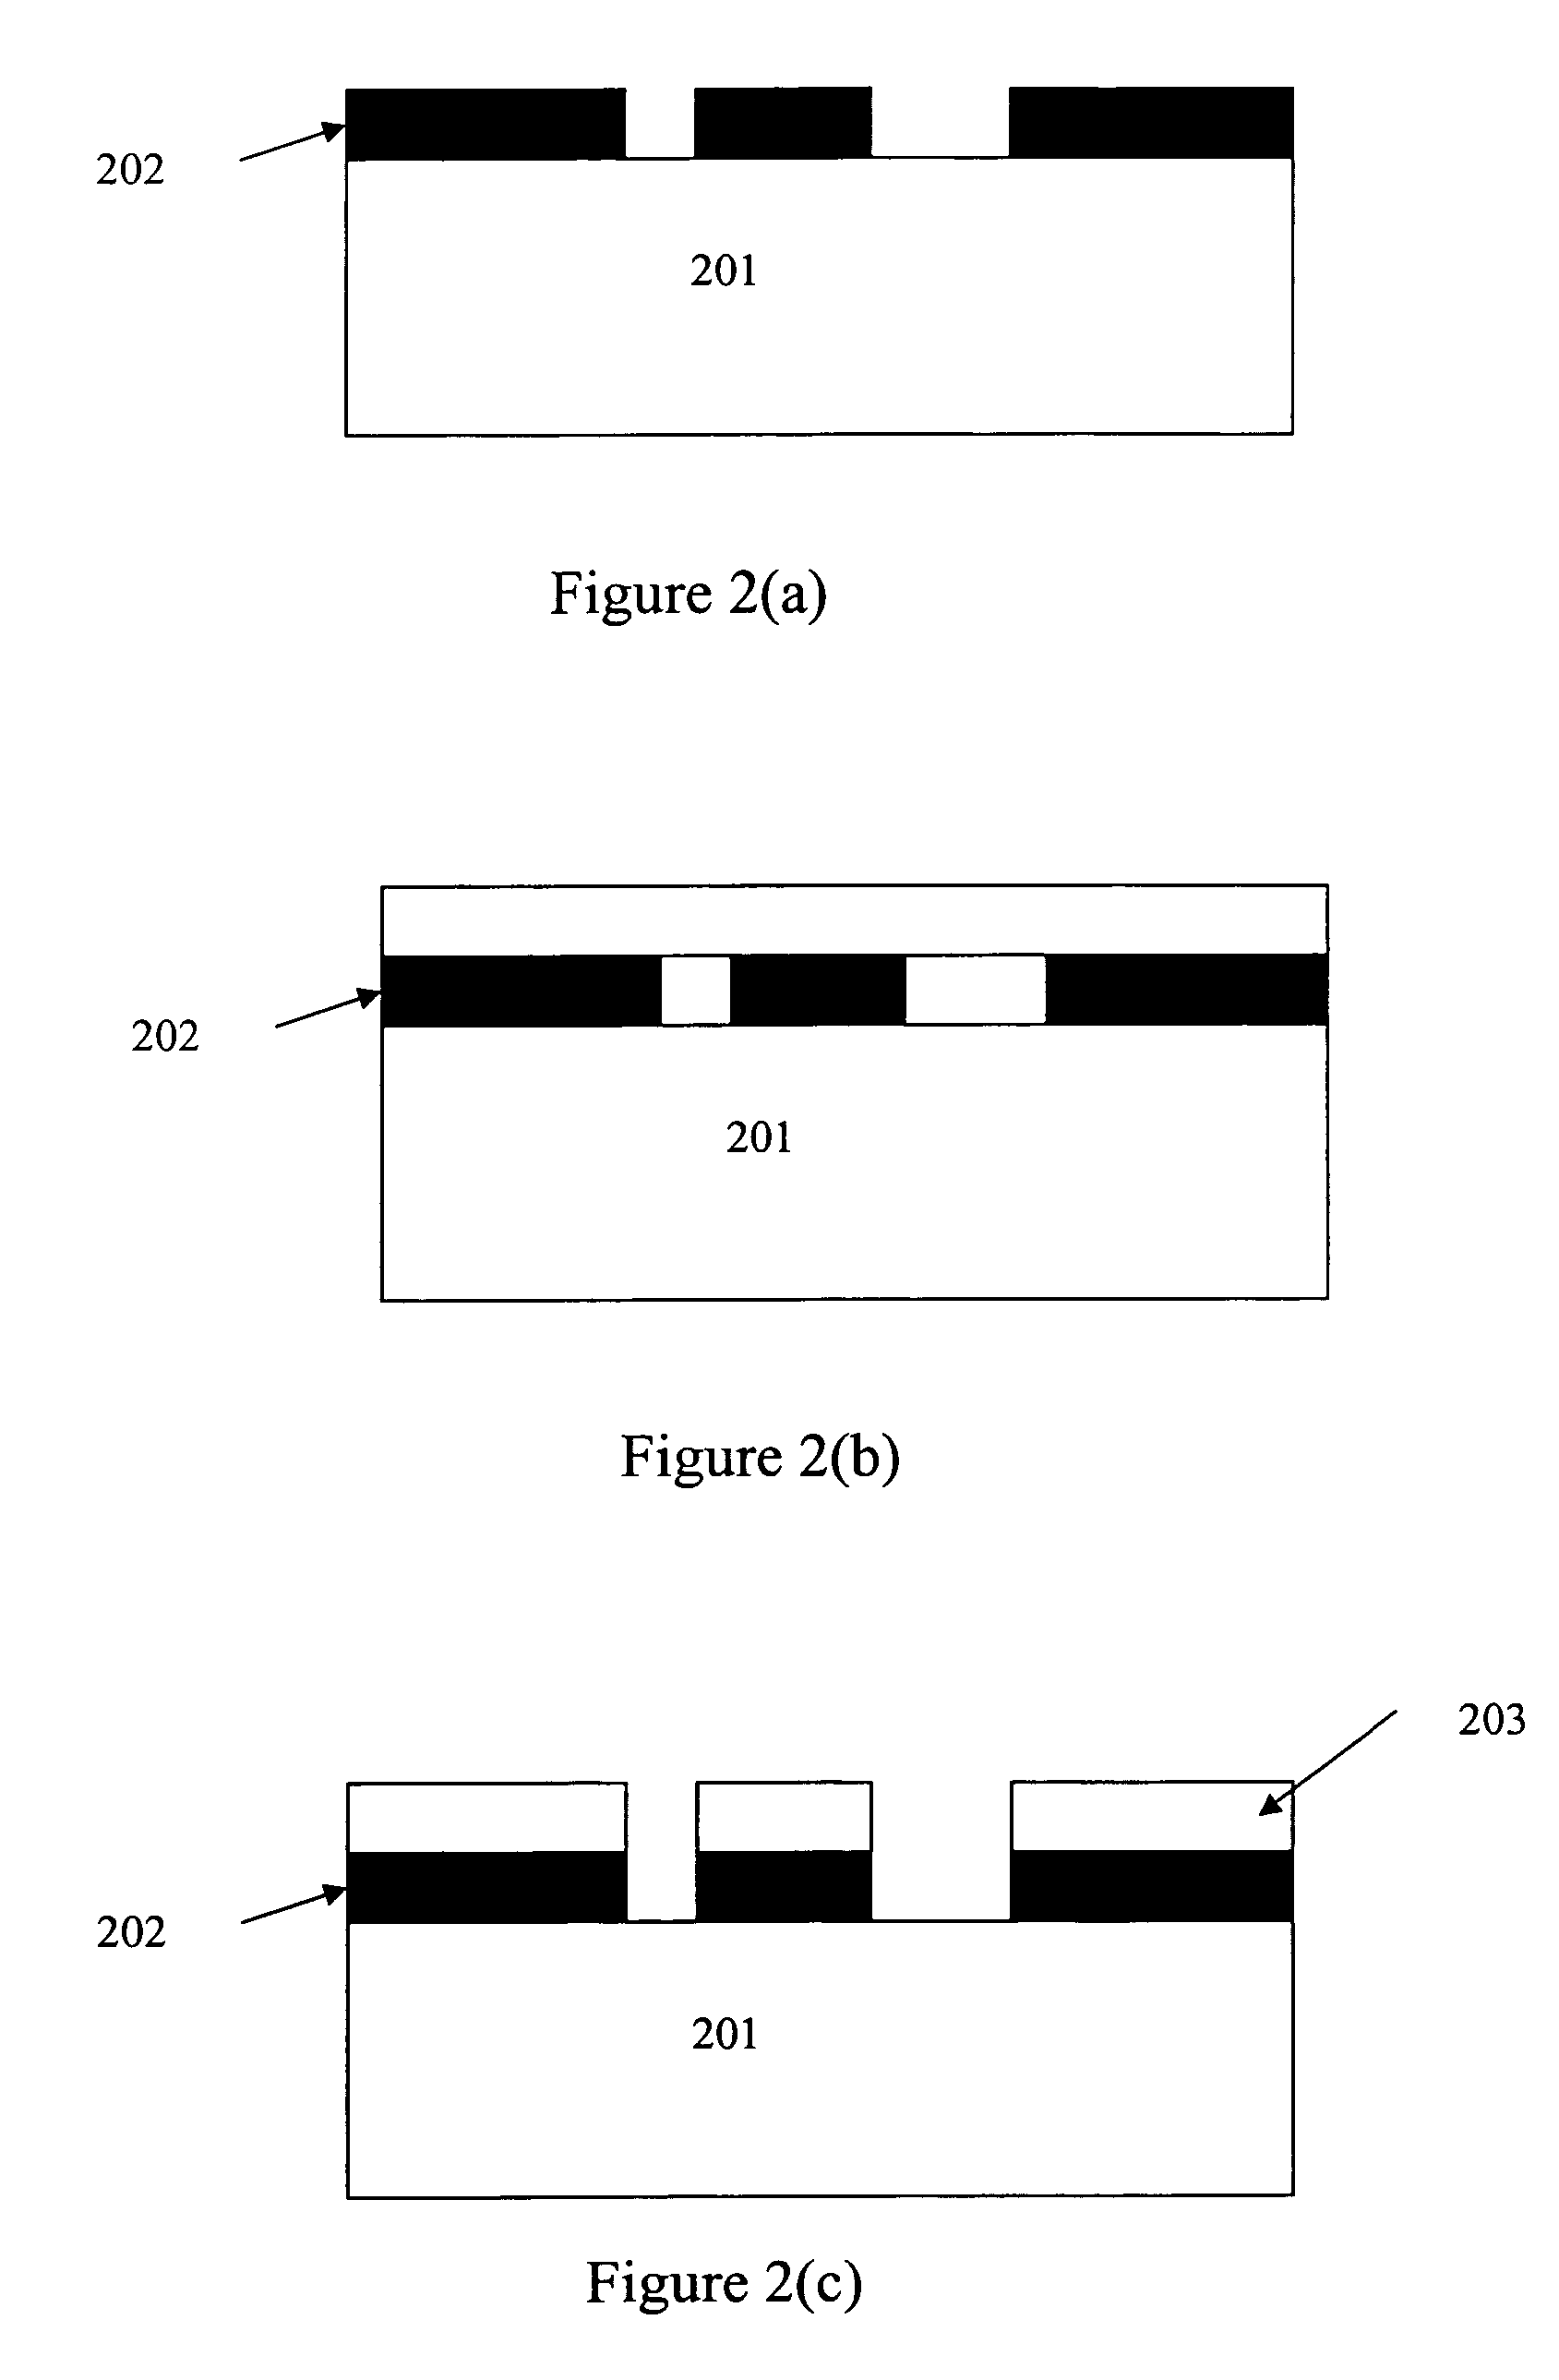 Method of attaching hologram films to printed matter